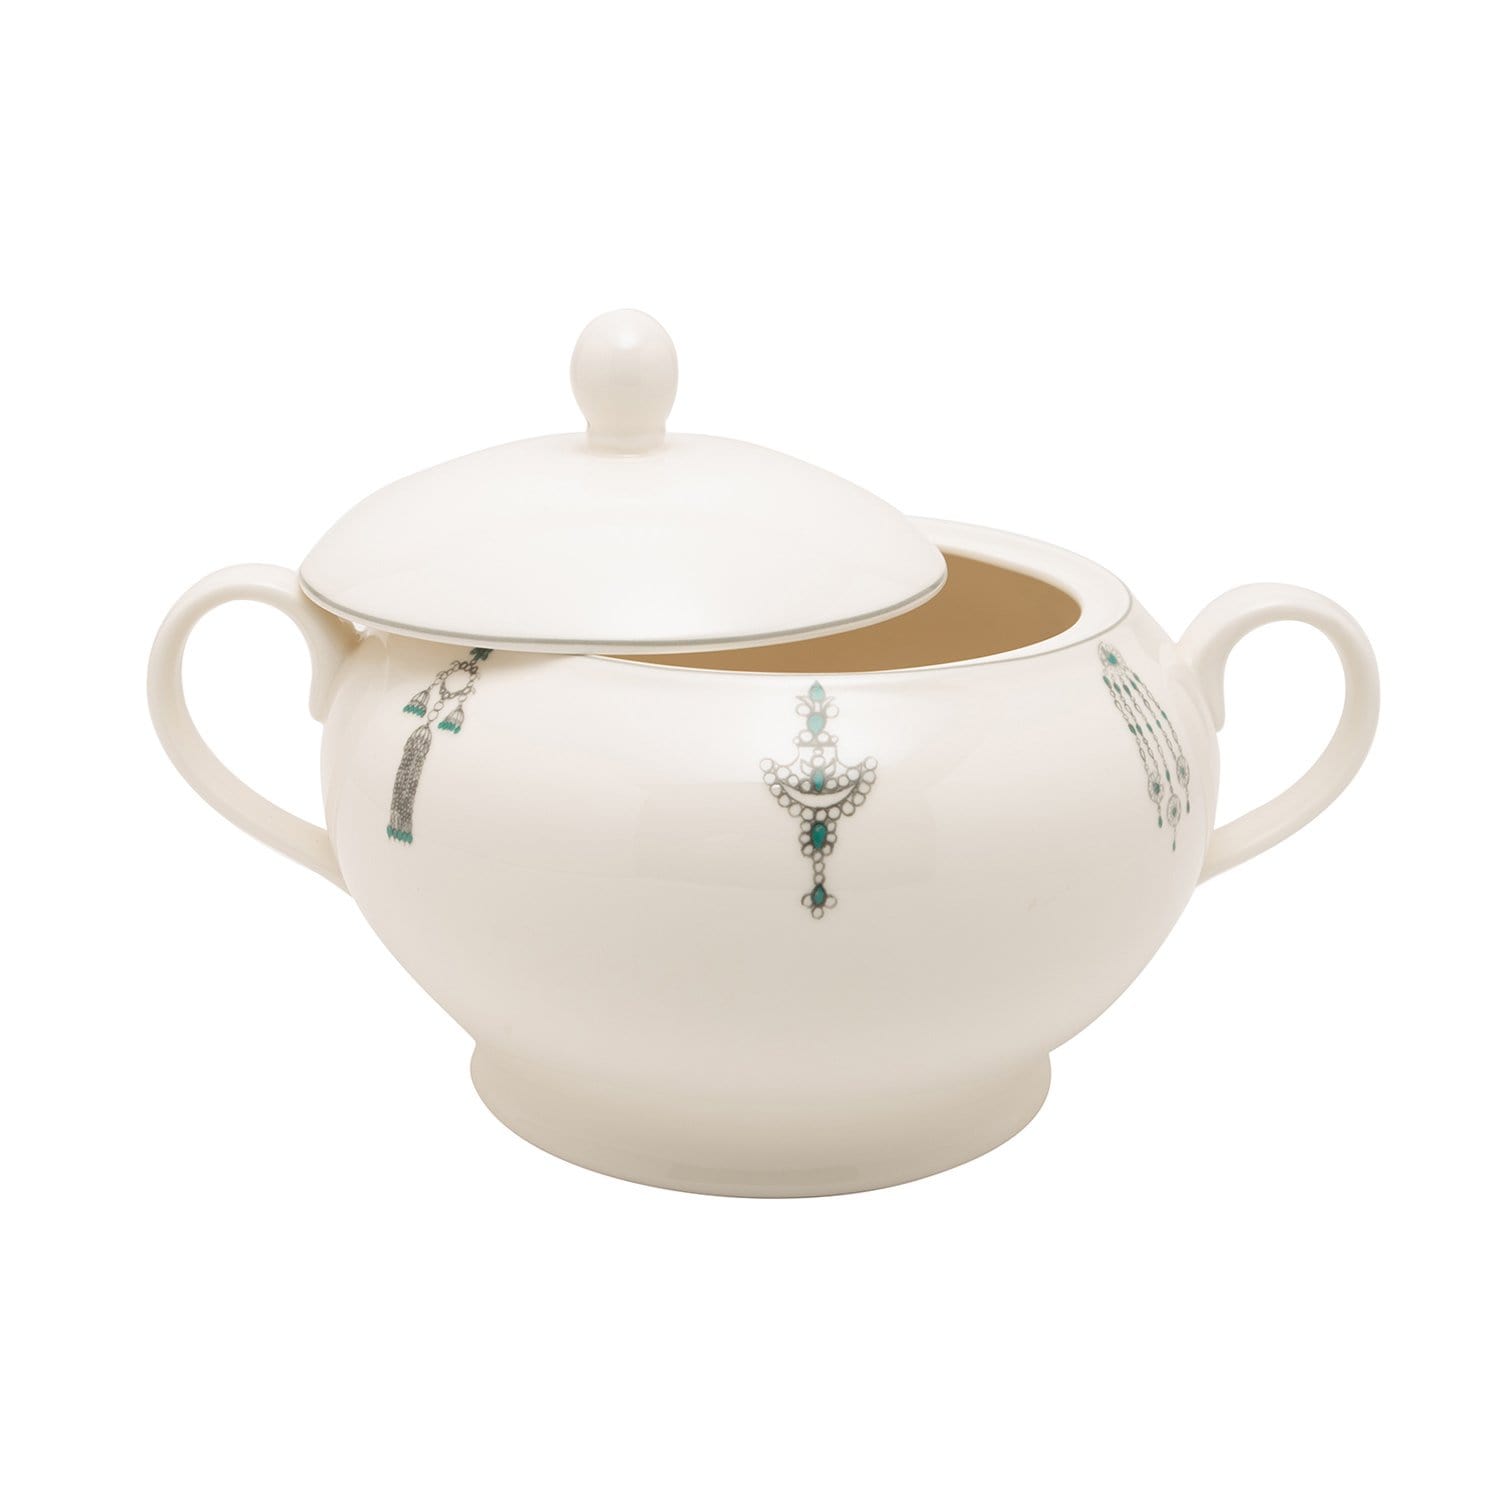 L'atelier FB Emerald Soup Tureen with Lid - 2800 cc. - TC 4711 015 - Jashanmal Home